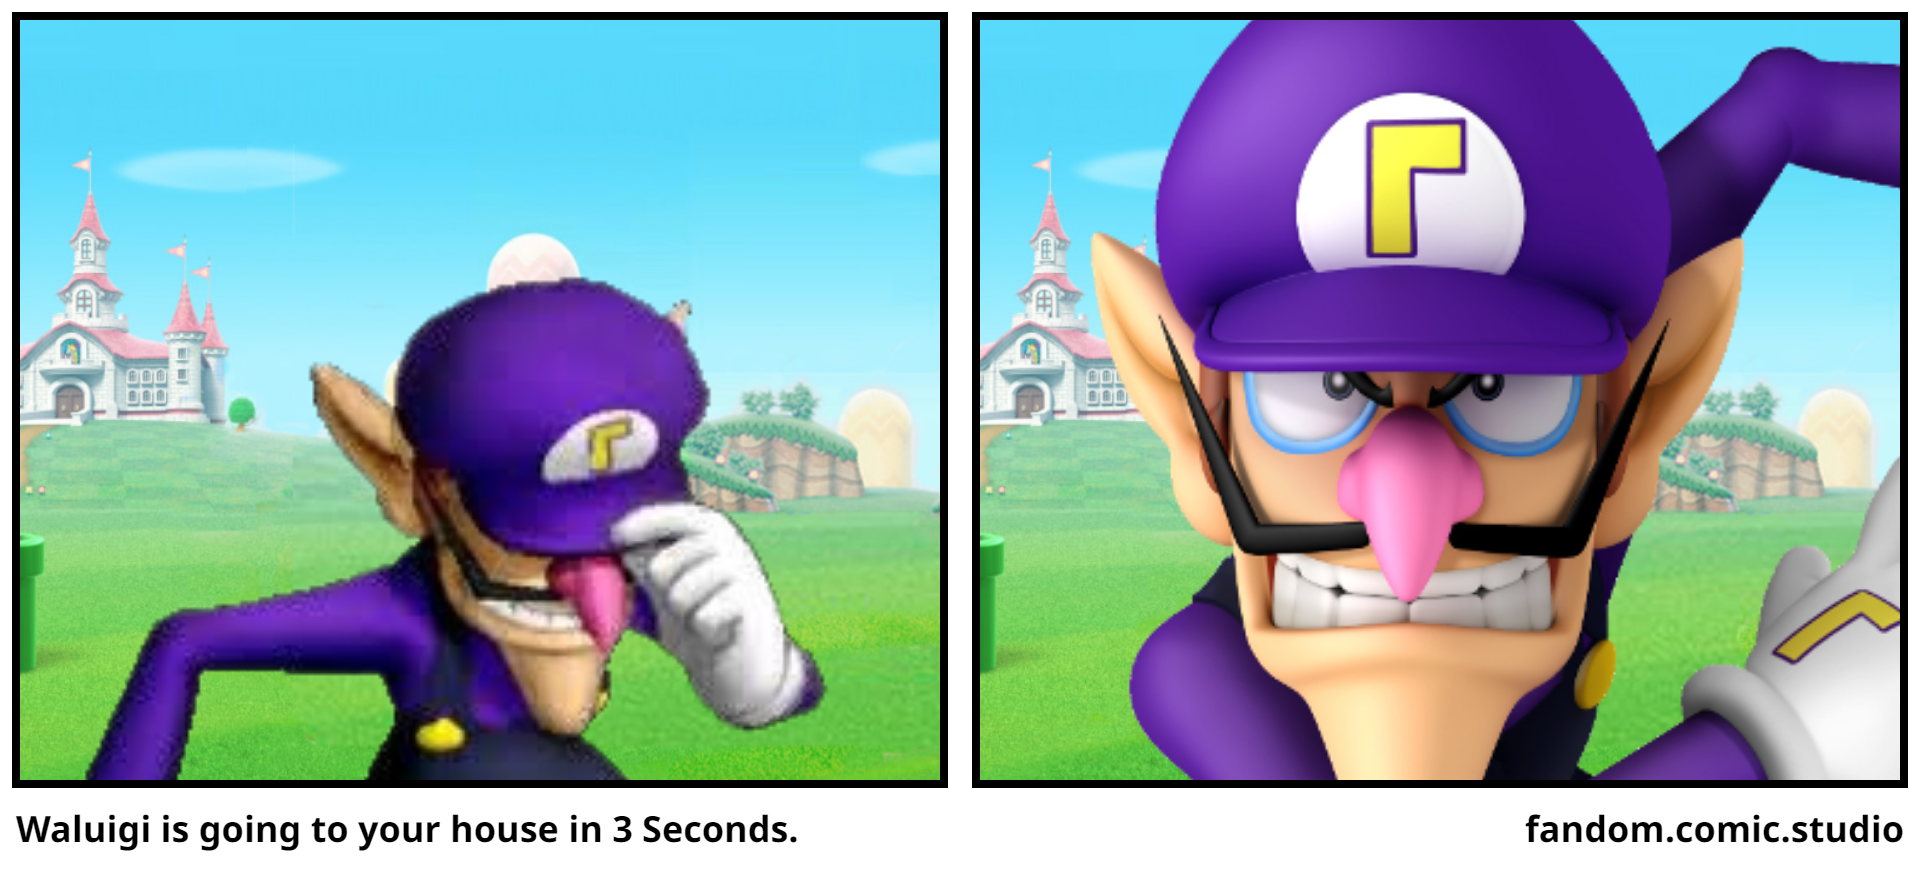 Waluigi is going to your house in 3 Seconds.